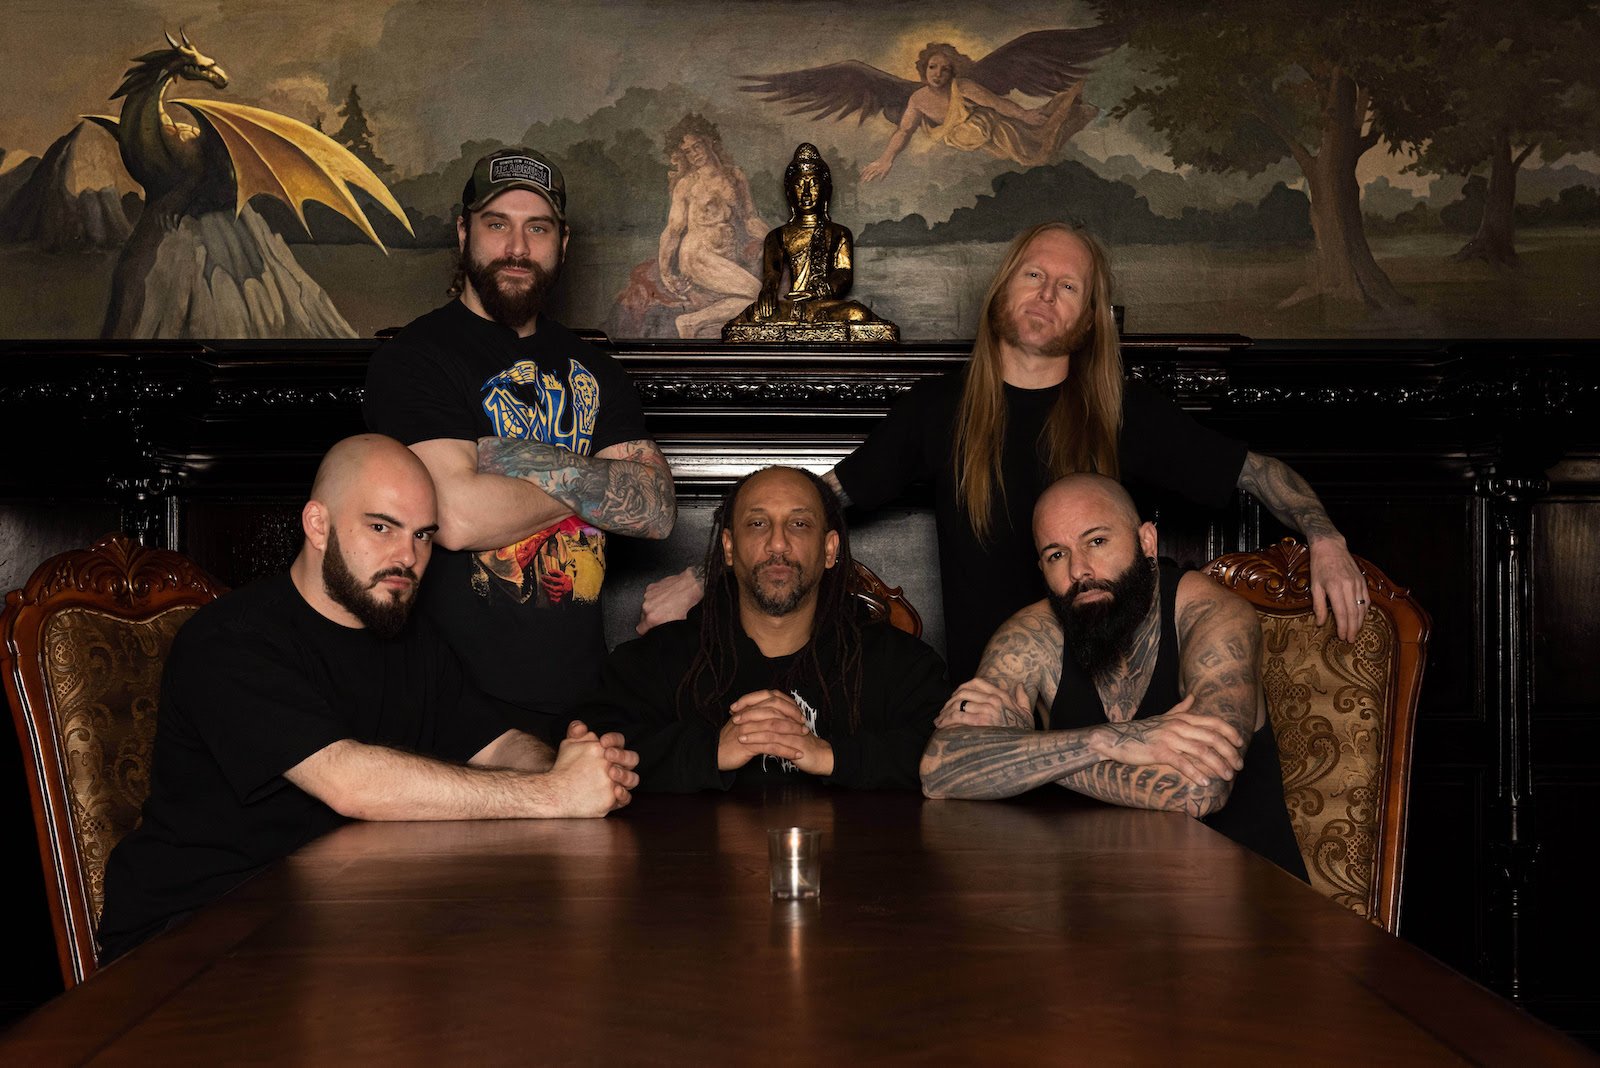 Read more about the article SUFFOCATION reveal 3D lyric video for new song “Delusions Of Mortality”.